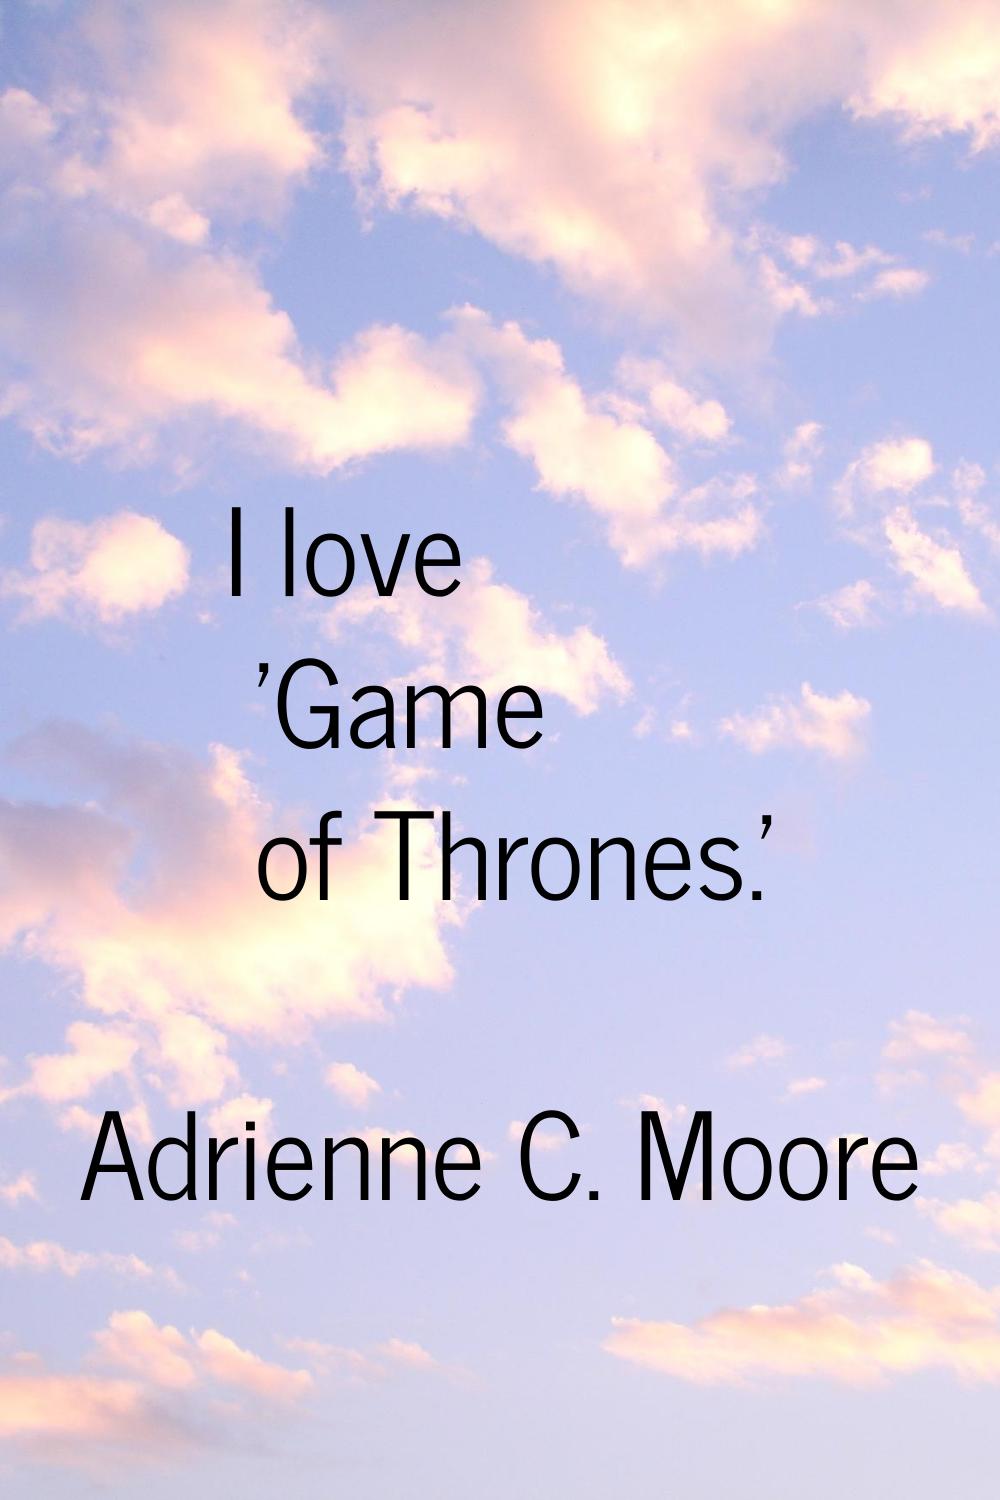 I love 'Game of Thrones.'